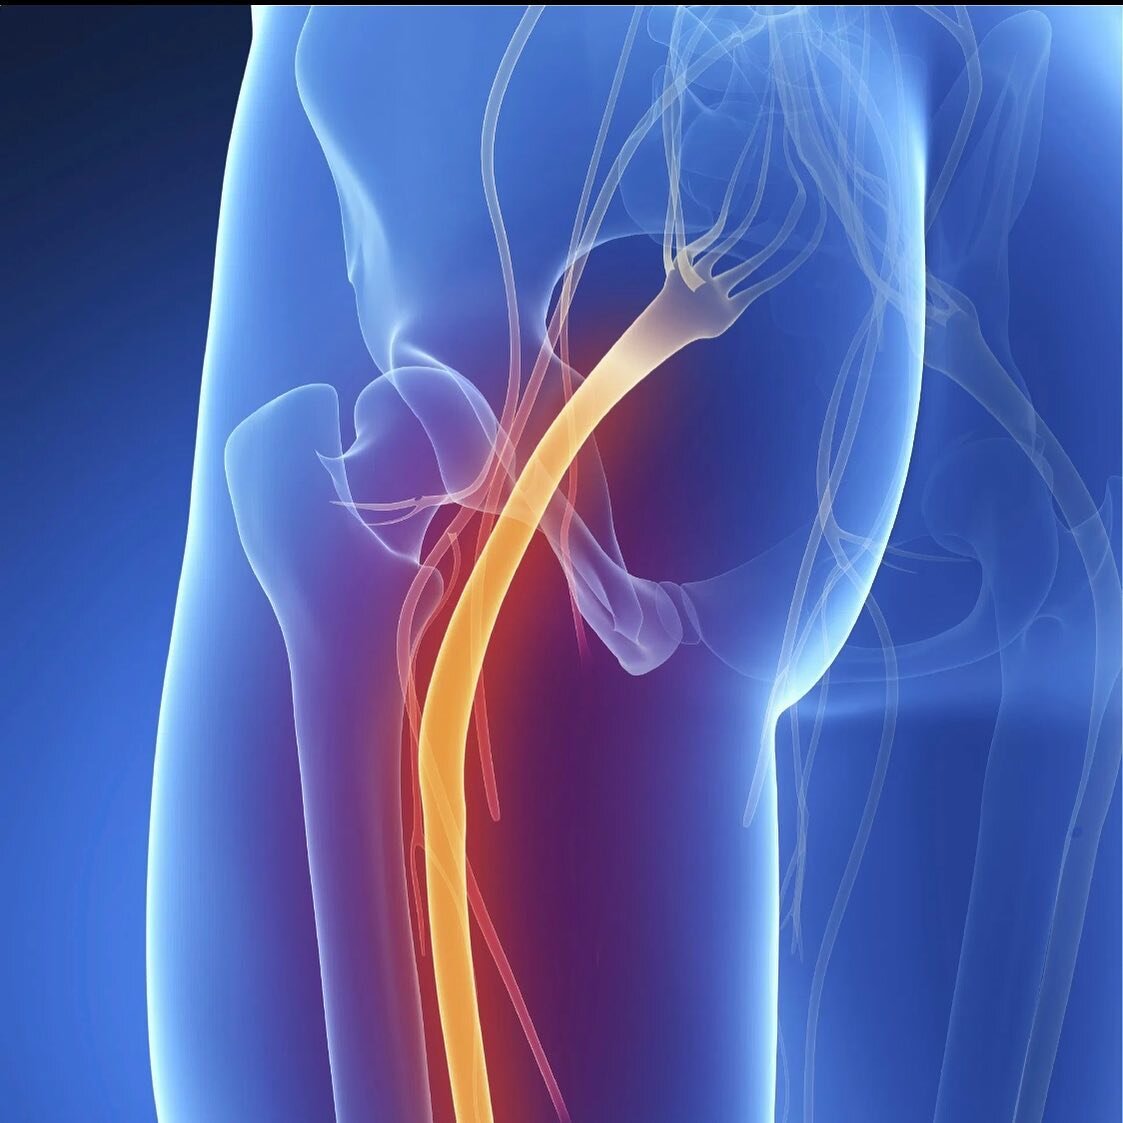 The Sciatic nerve originates in the low back, going from the upper thigh all the way down the leg. Painful throbbing in the low back and limbs can be caused by a condition known as sciatica. 

The biggest cause of sciatic pain are herniated spinal di